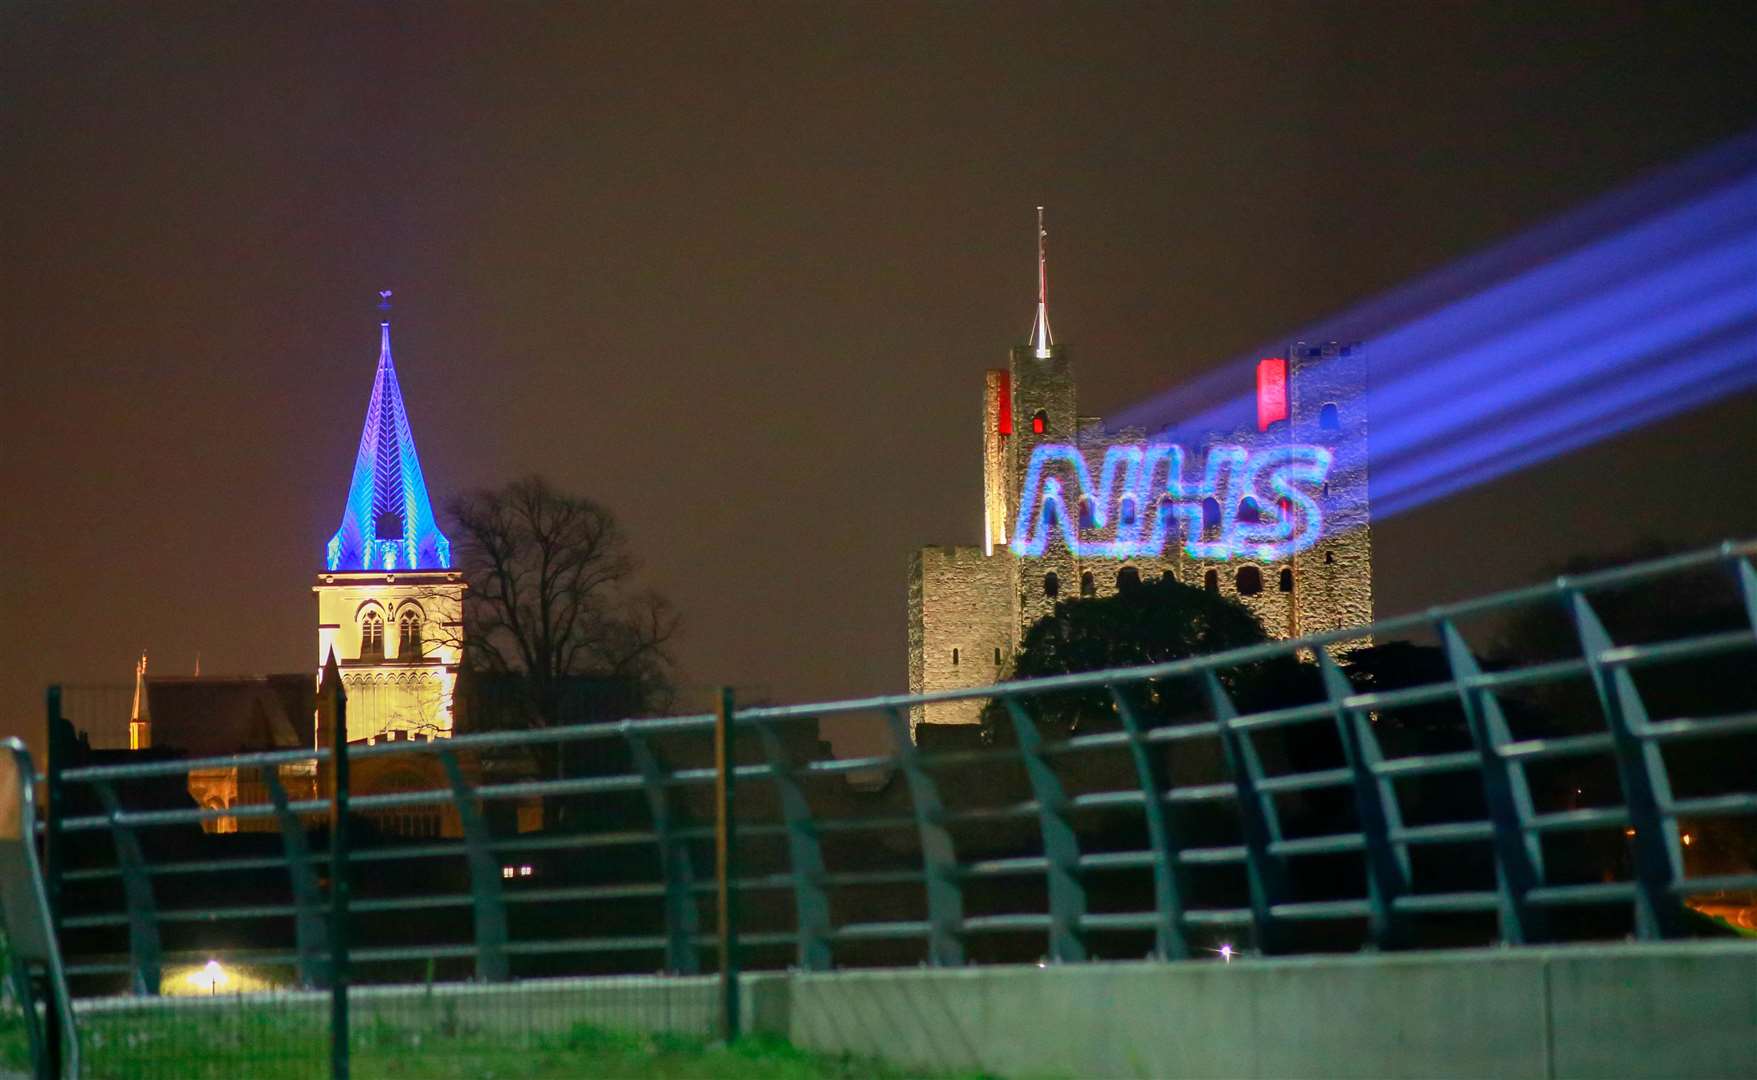 The NHS logo was beamed onto the side of Rochester Castle as the Cathedral next door is lit up blue for the Clap for Carers to support NHS workers during coronavirus. Picture Kent Media Group